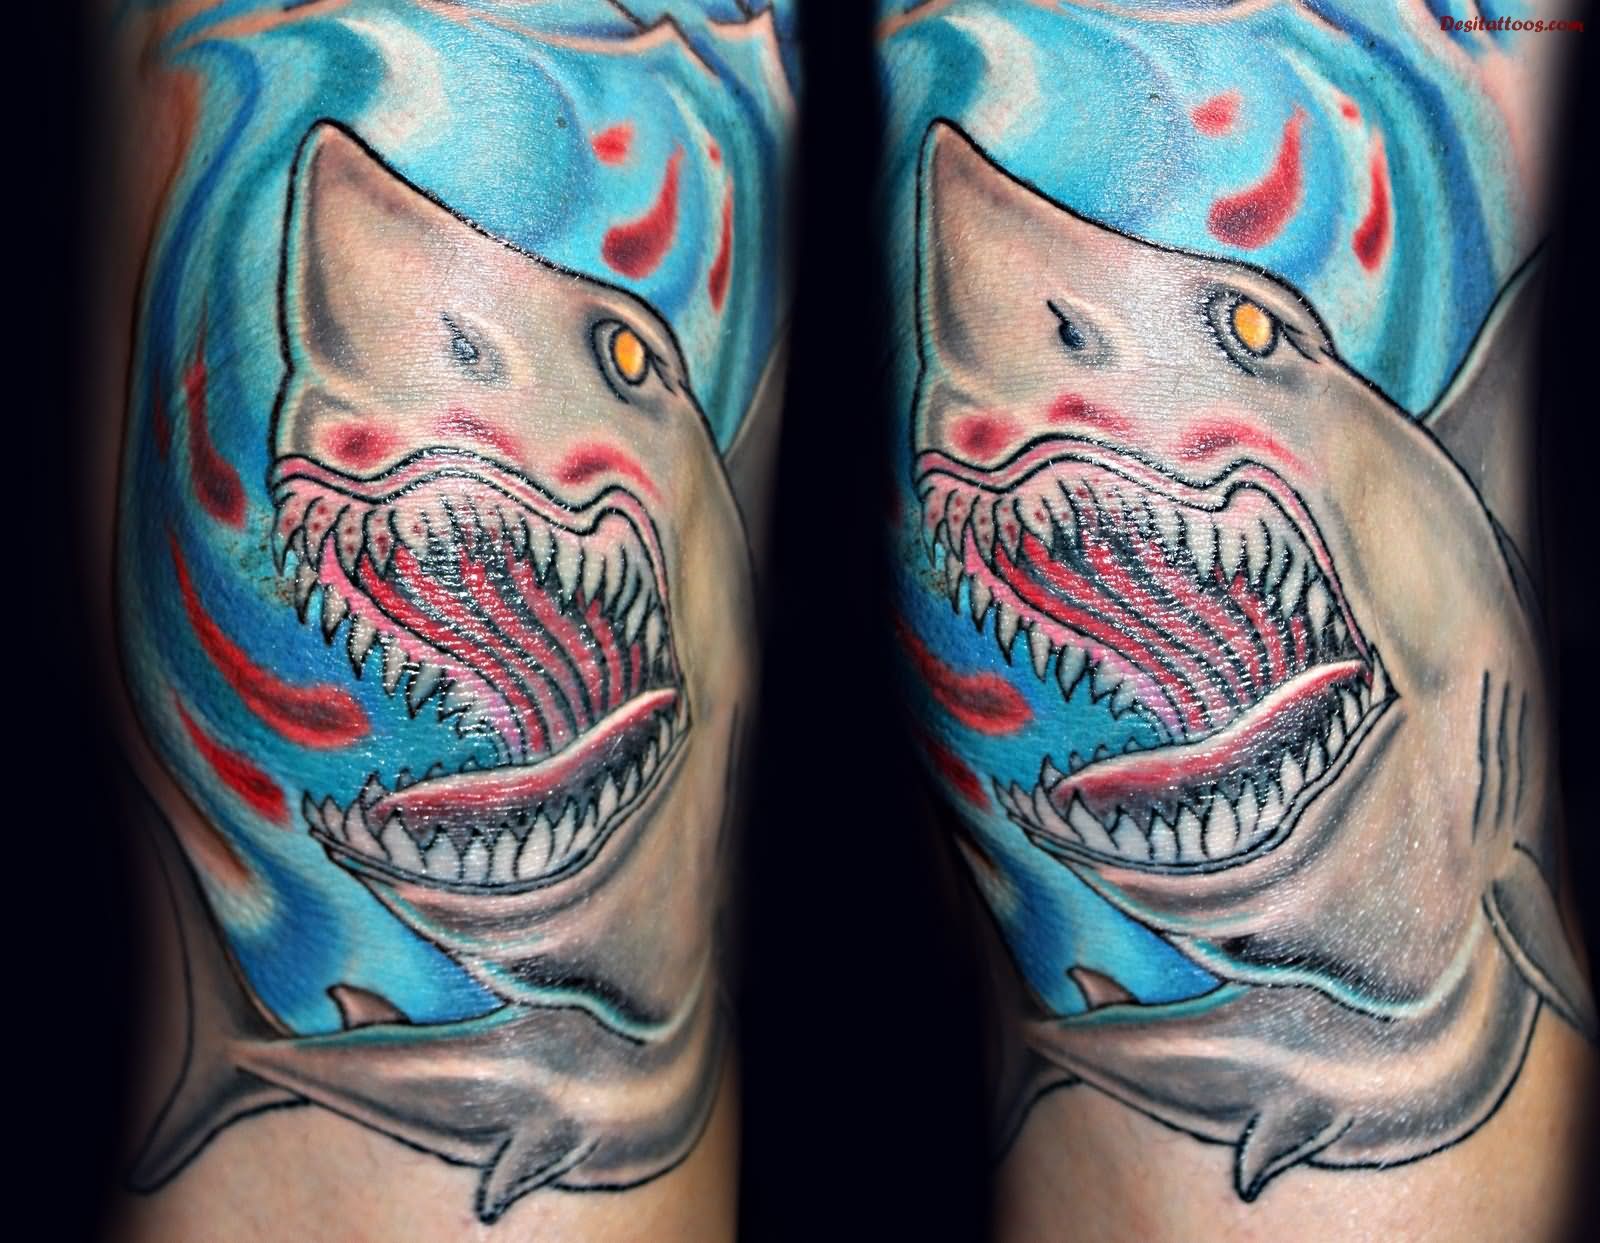 Colorful Shark Tattoo For Knee